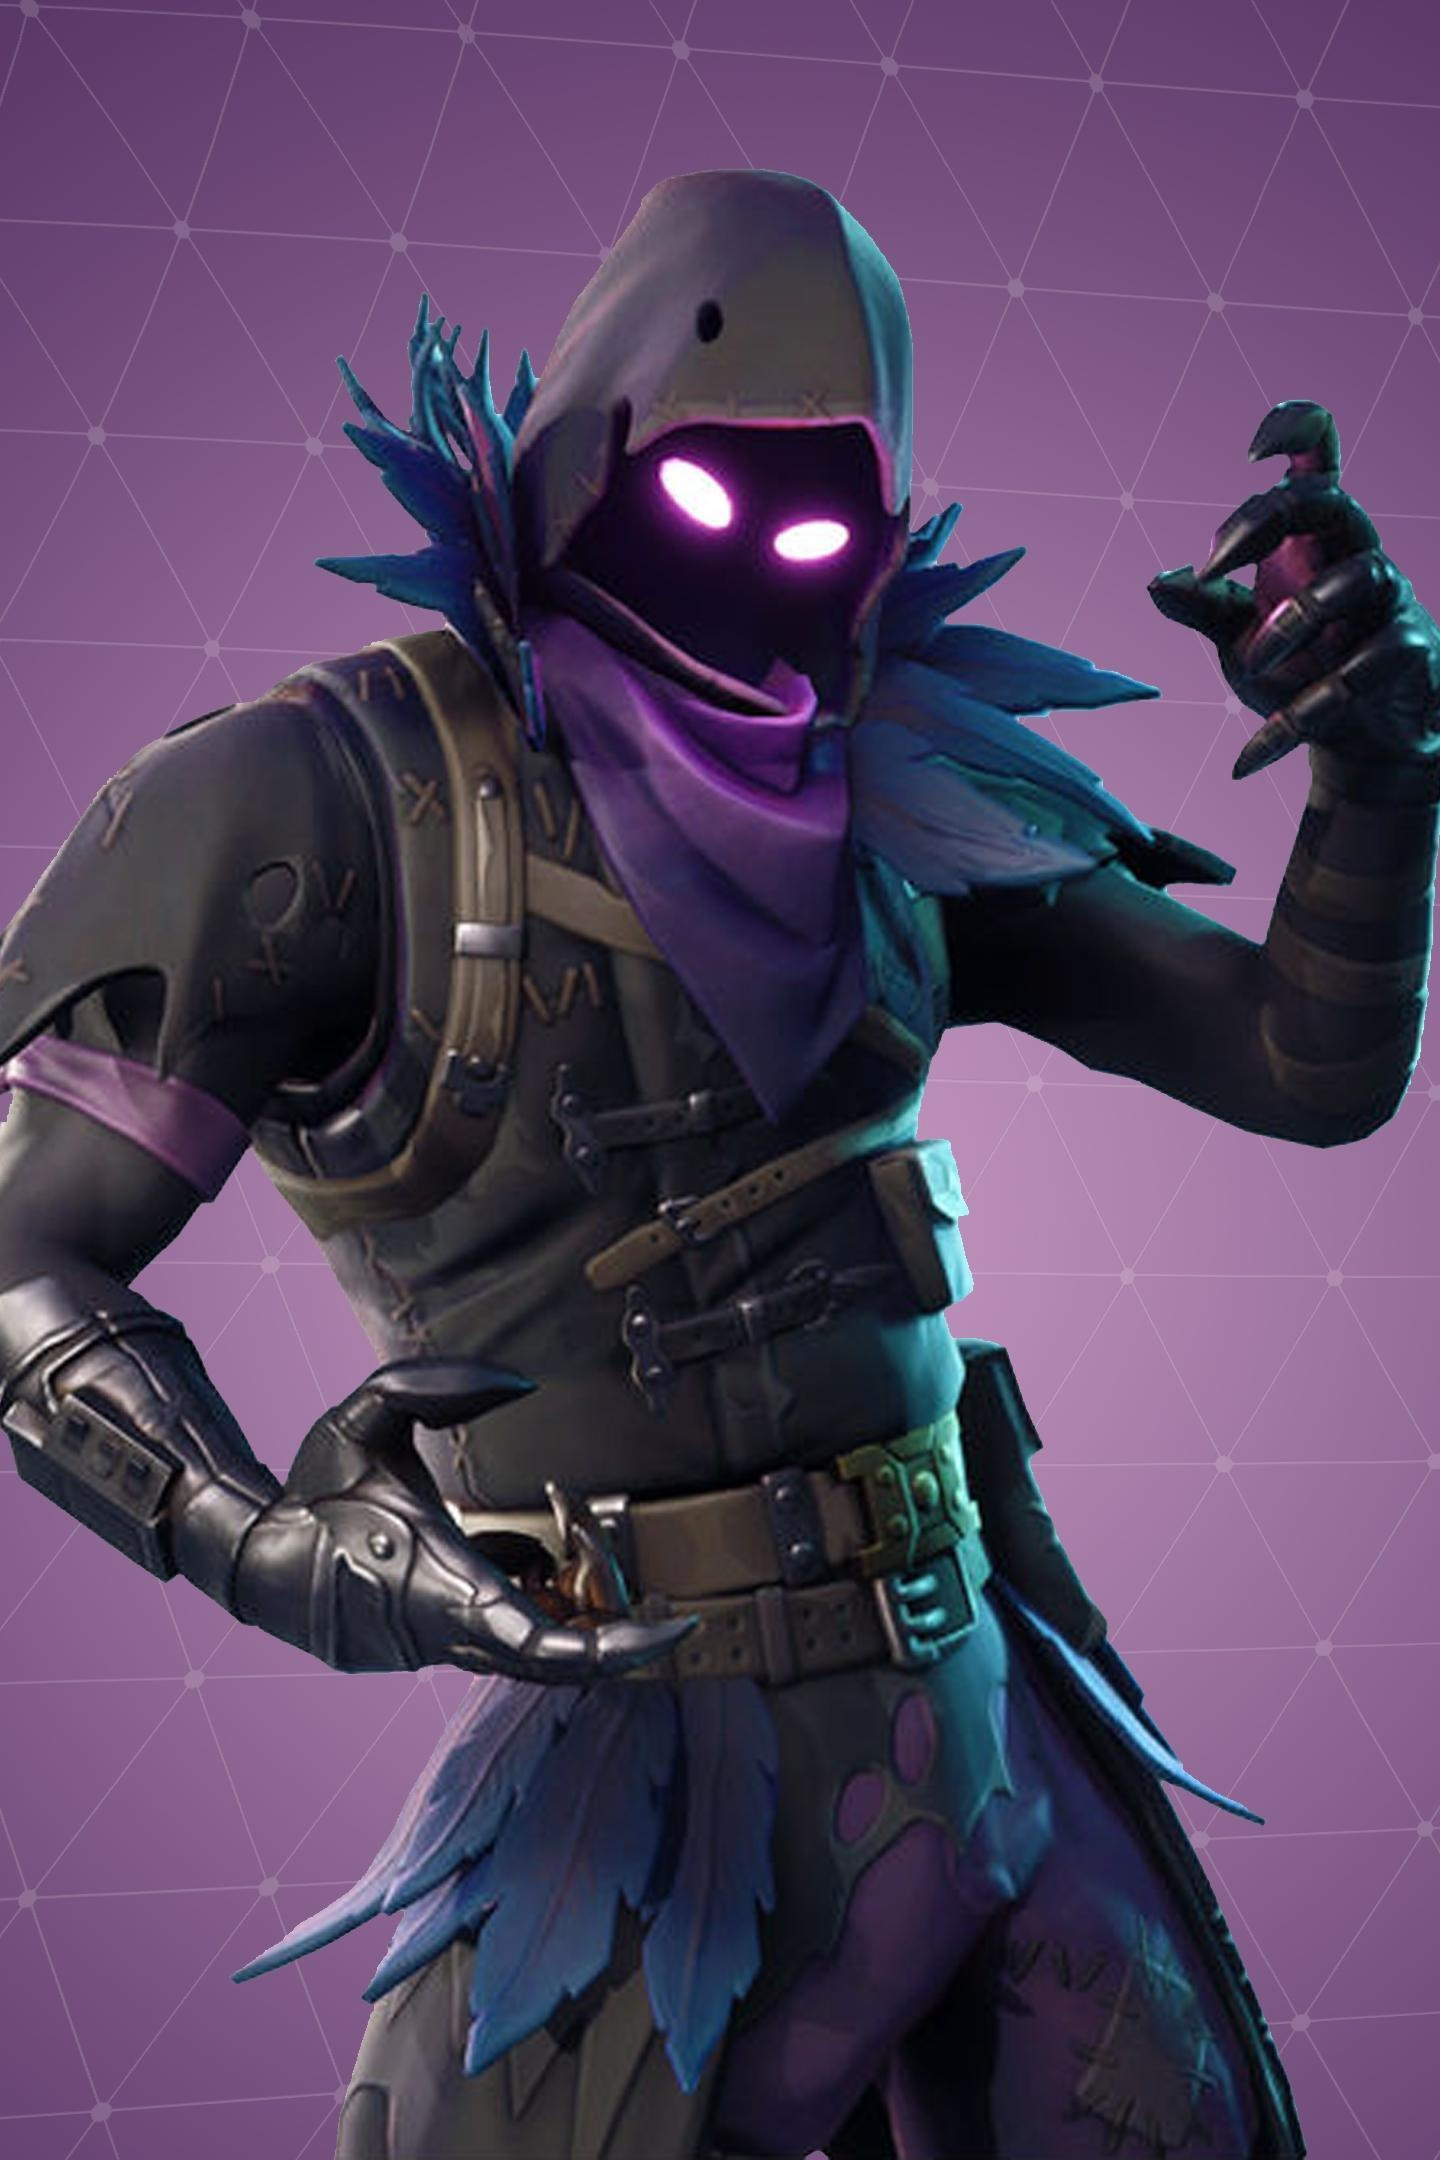 Free Download Download 1440x2960 Wallpaper Fortnite Warrior Video Game Raven 1440x2160 For Your Desktop Mobile Tablet Explore 18 Fortnite Galaxy Skin Wallpapers Fortnite Galaxy Skin Wallpapers Galaxy Skin Fortnite